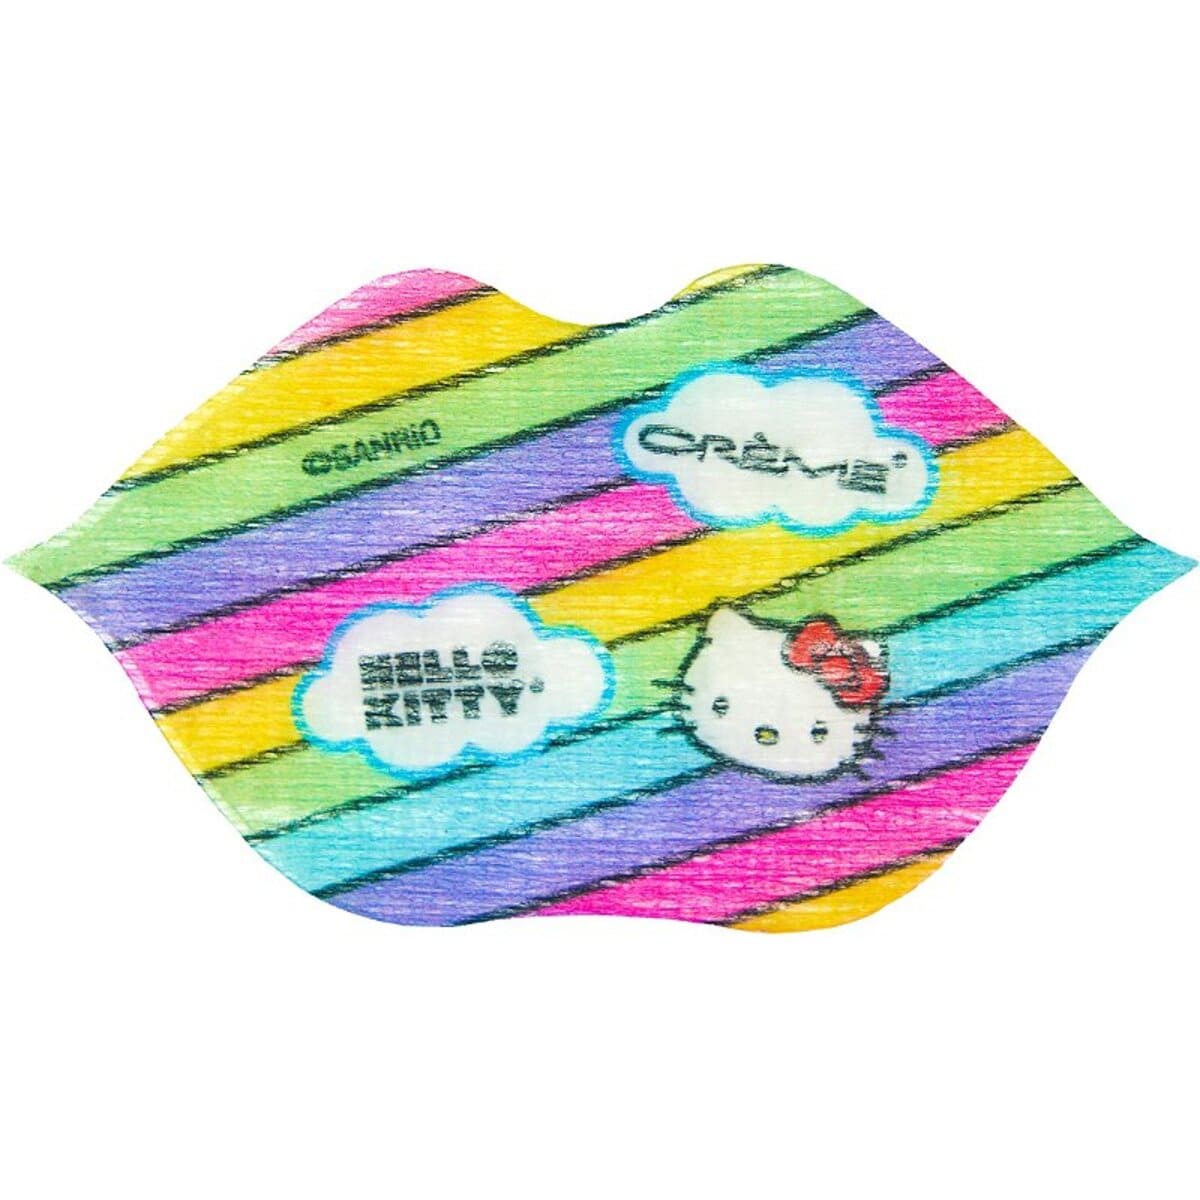 HYDROGEL LIP PATCH MOISTURIZING SMOOTHING AND PLUMPING OUTLET - THE CREME SHOP X HELLO KITTY